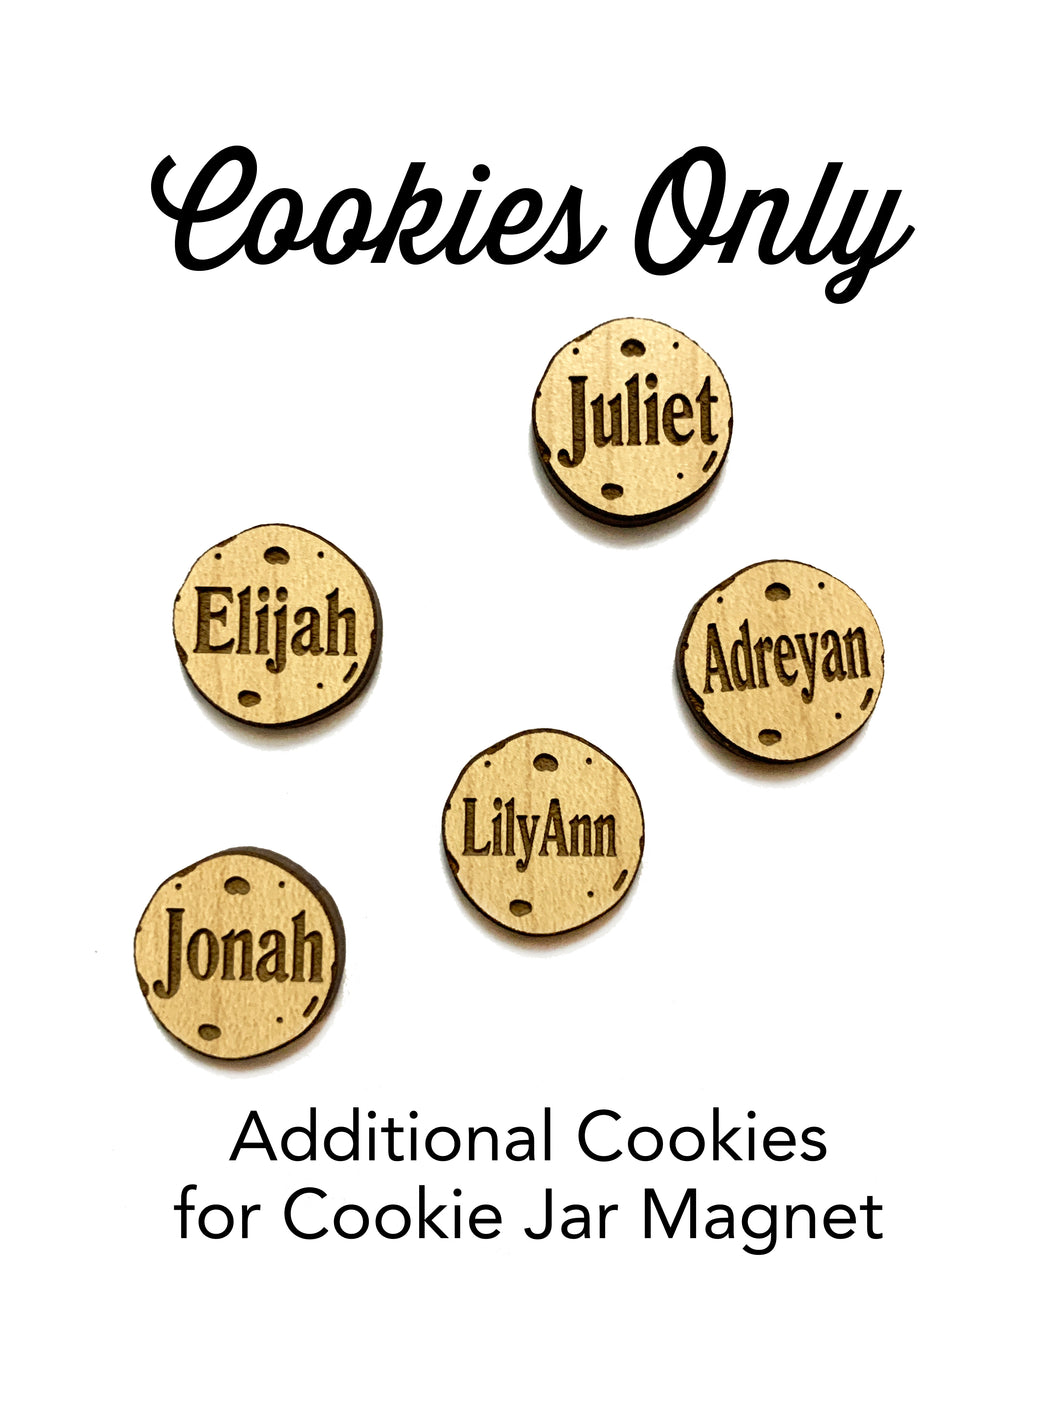 Additional Cookies: Reorder More Cookies for Grandma's Little Cookie's Magnet - Cookie Jar Magnet Sold Separately - Add Throughout the Years